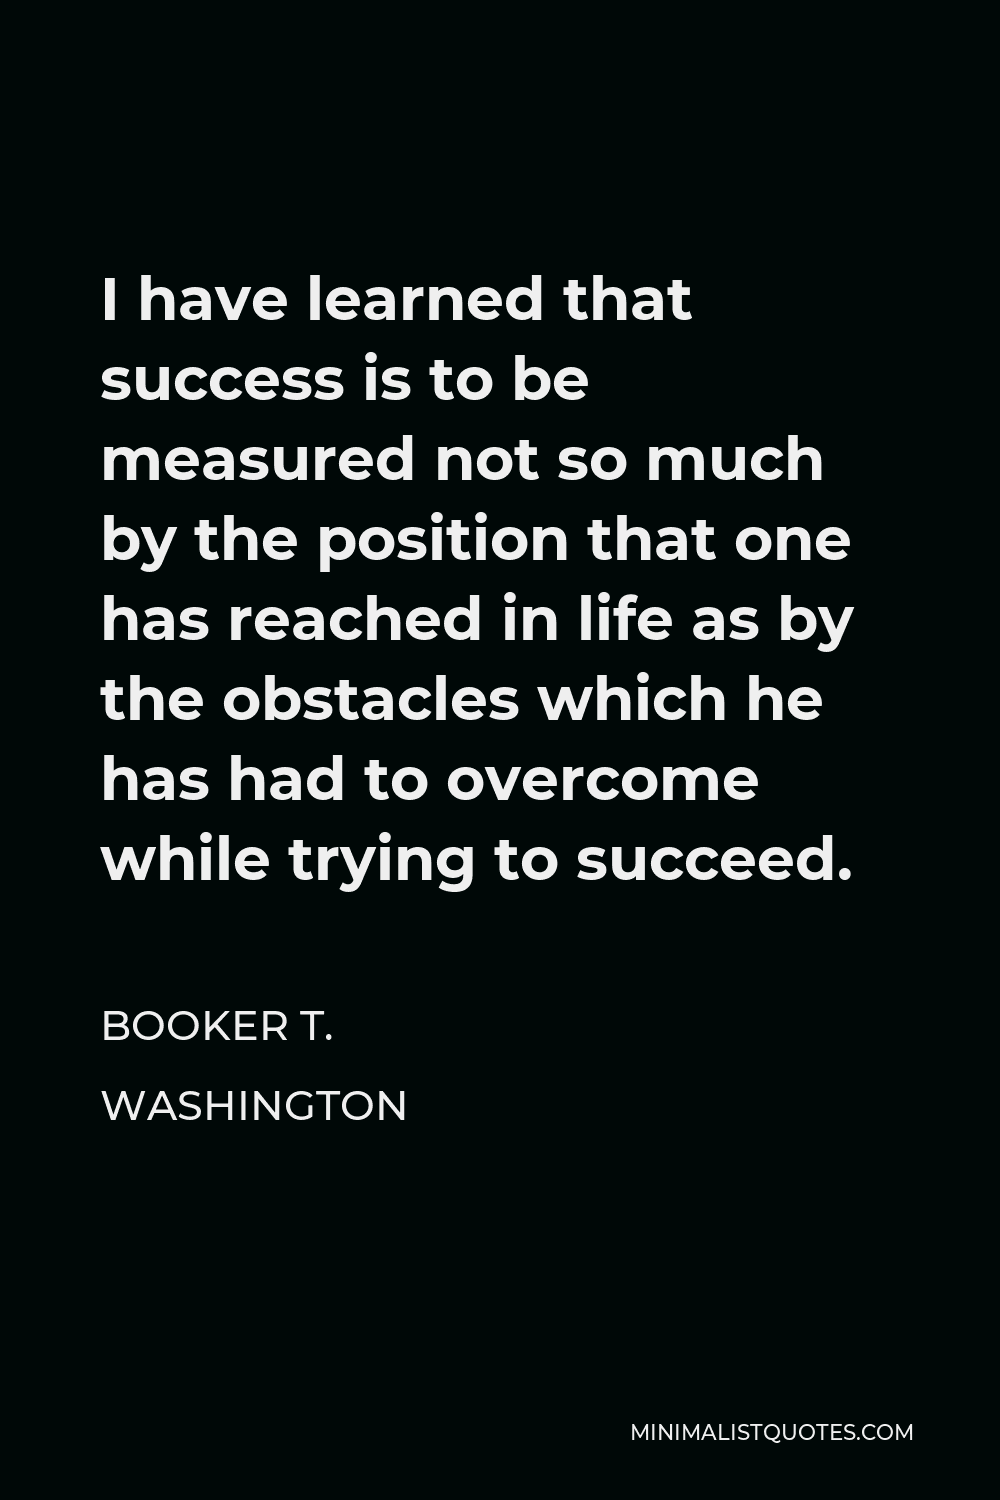 Booker T. Washington Quote - I have learned that success is to be measured not so much by the position that one has reached in life as by the obstacles which he has had to overcome while trying to succeed.